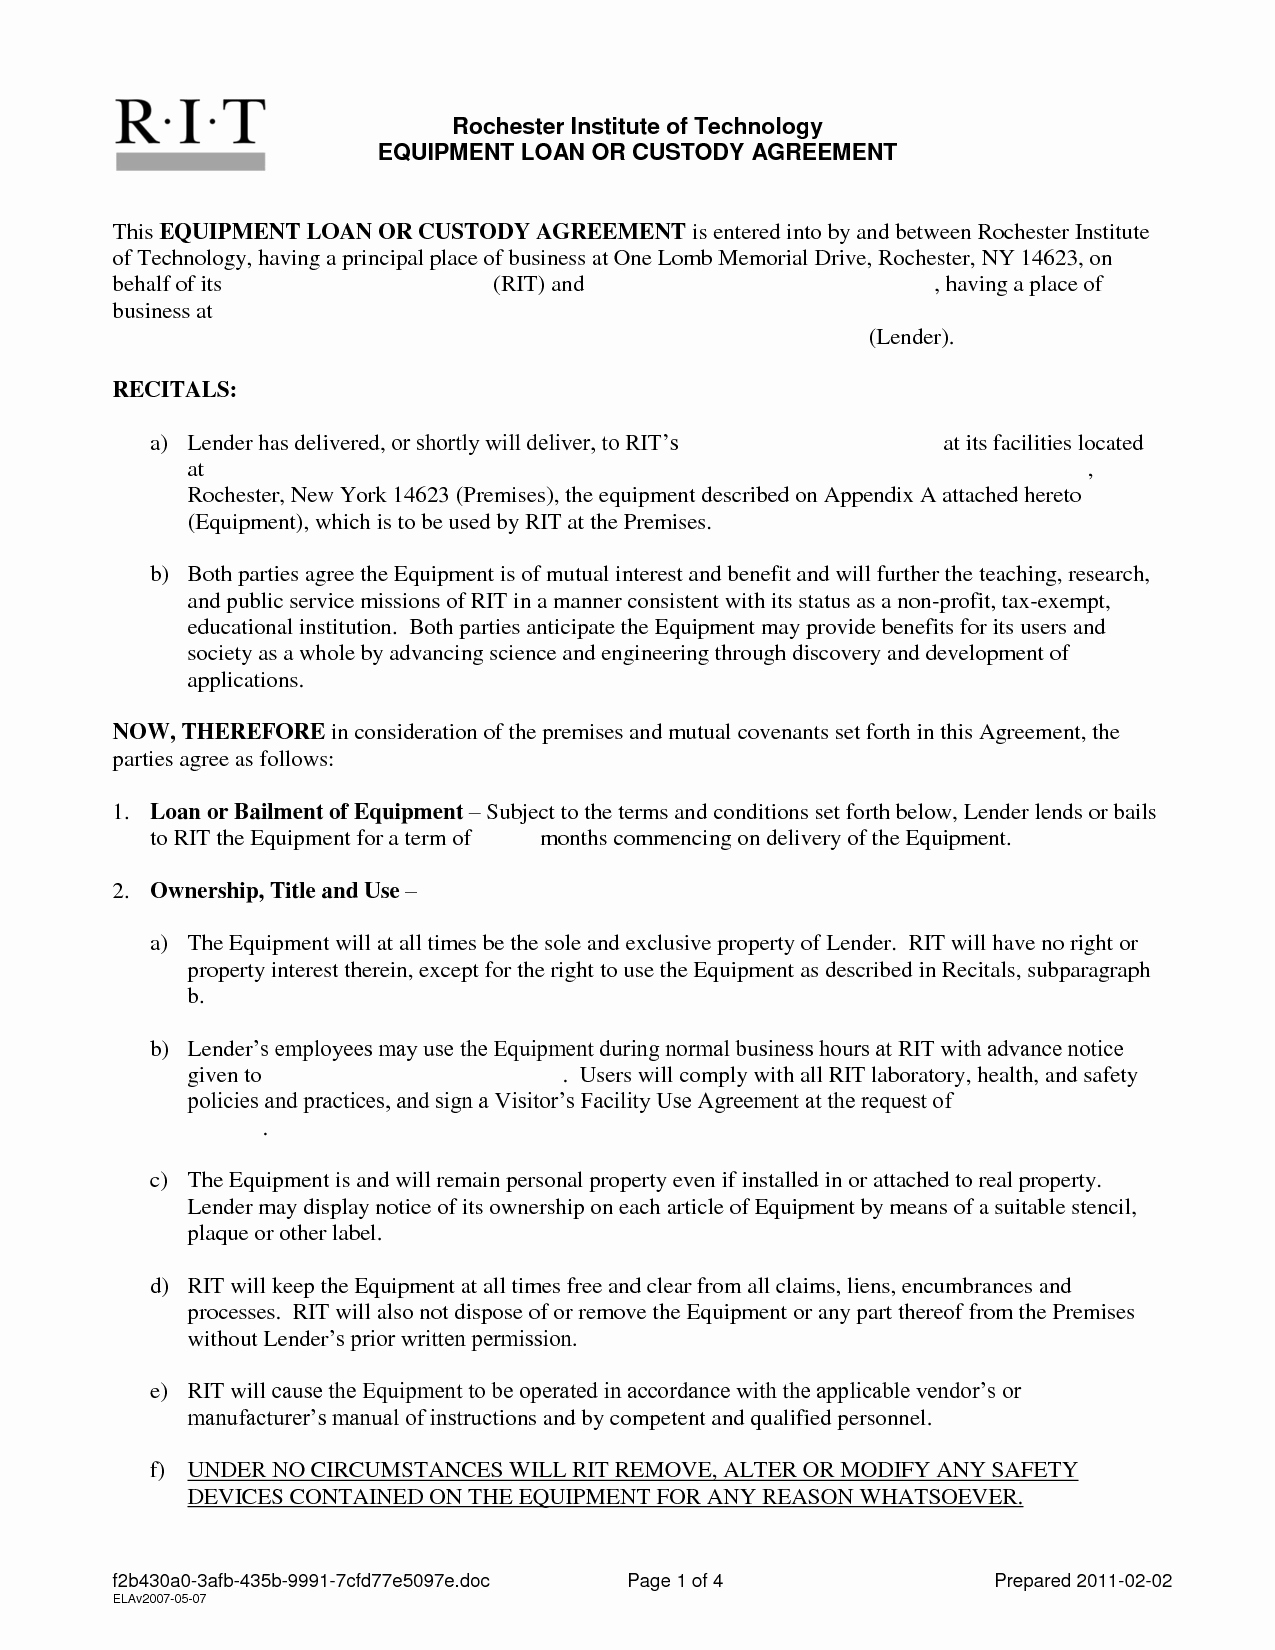 Private Loan Contract Template Awesome Free Printable Personal Loan Contract form Generic